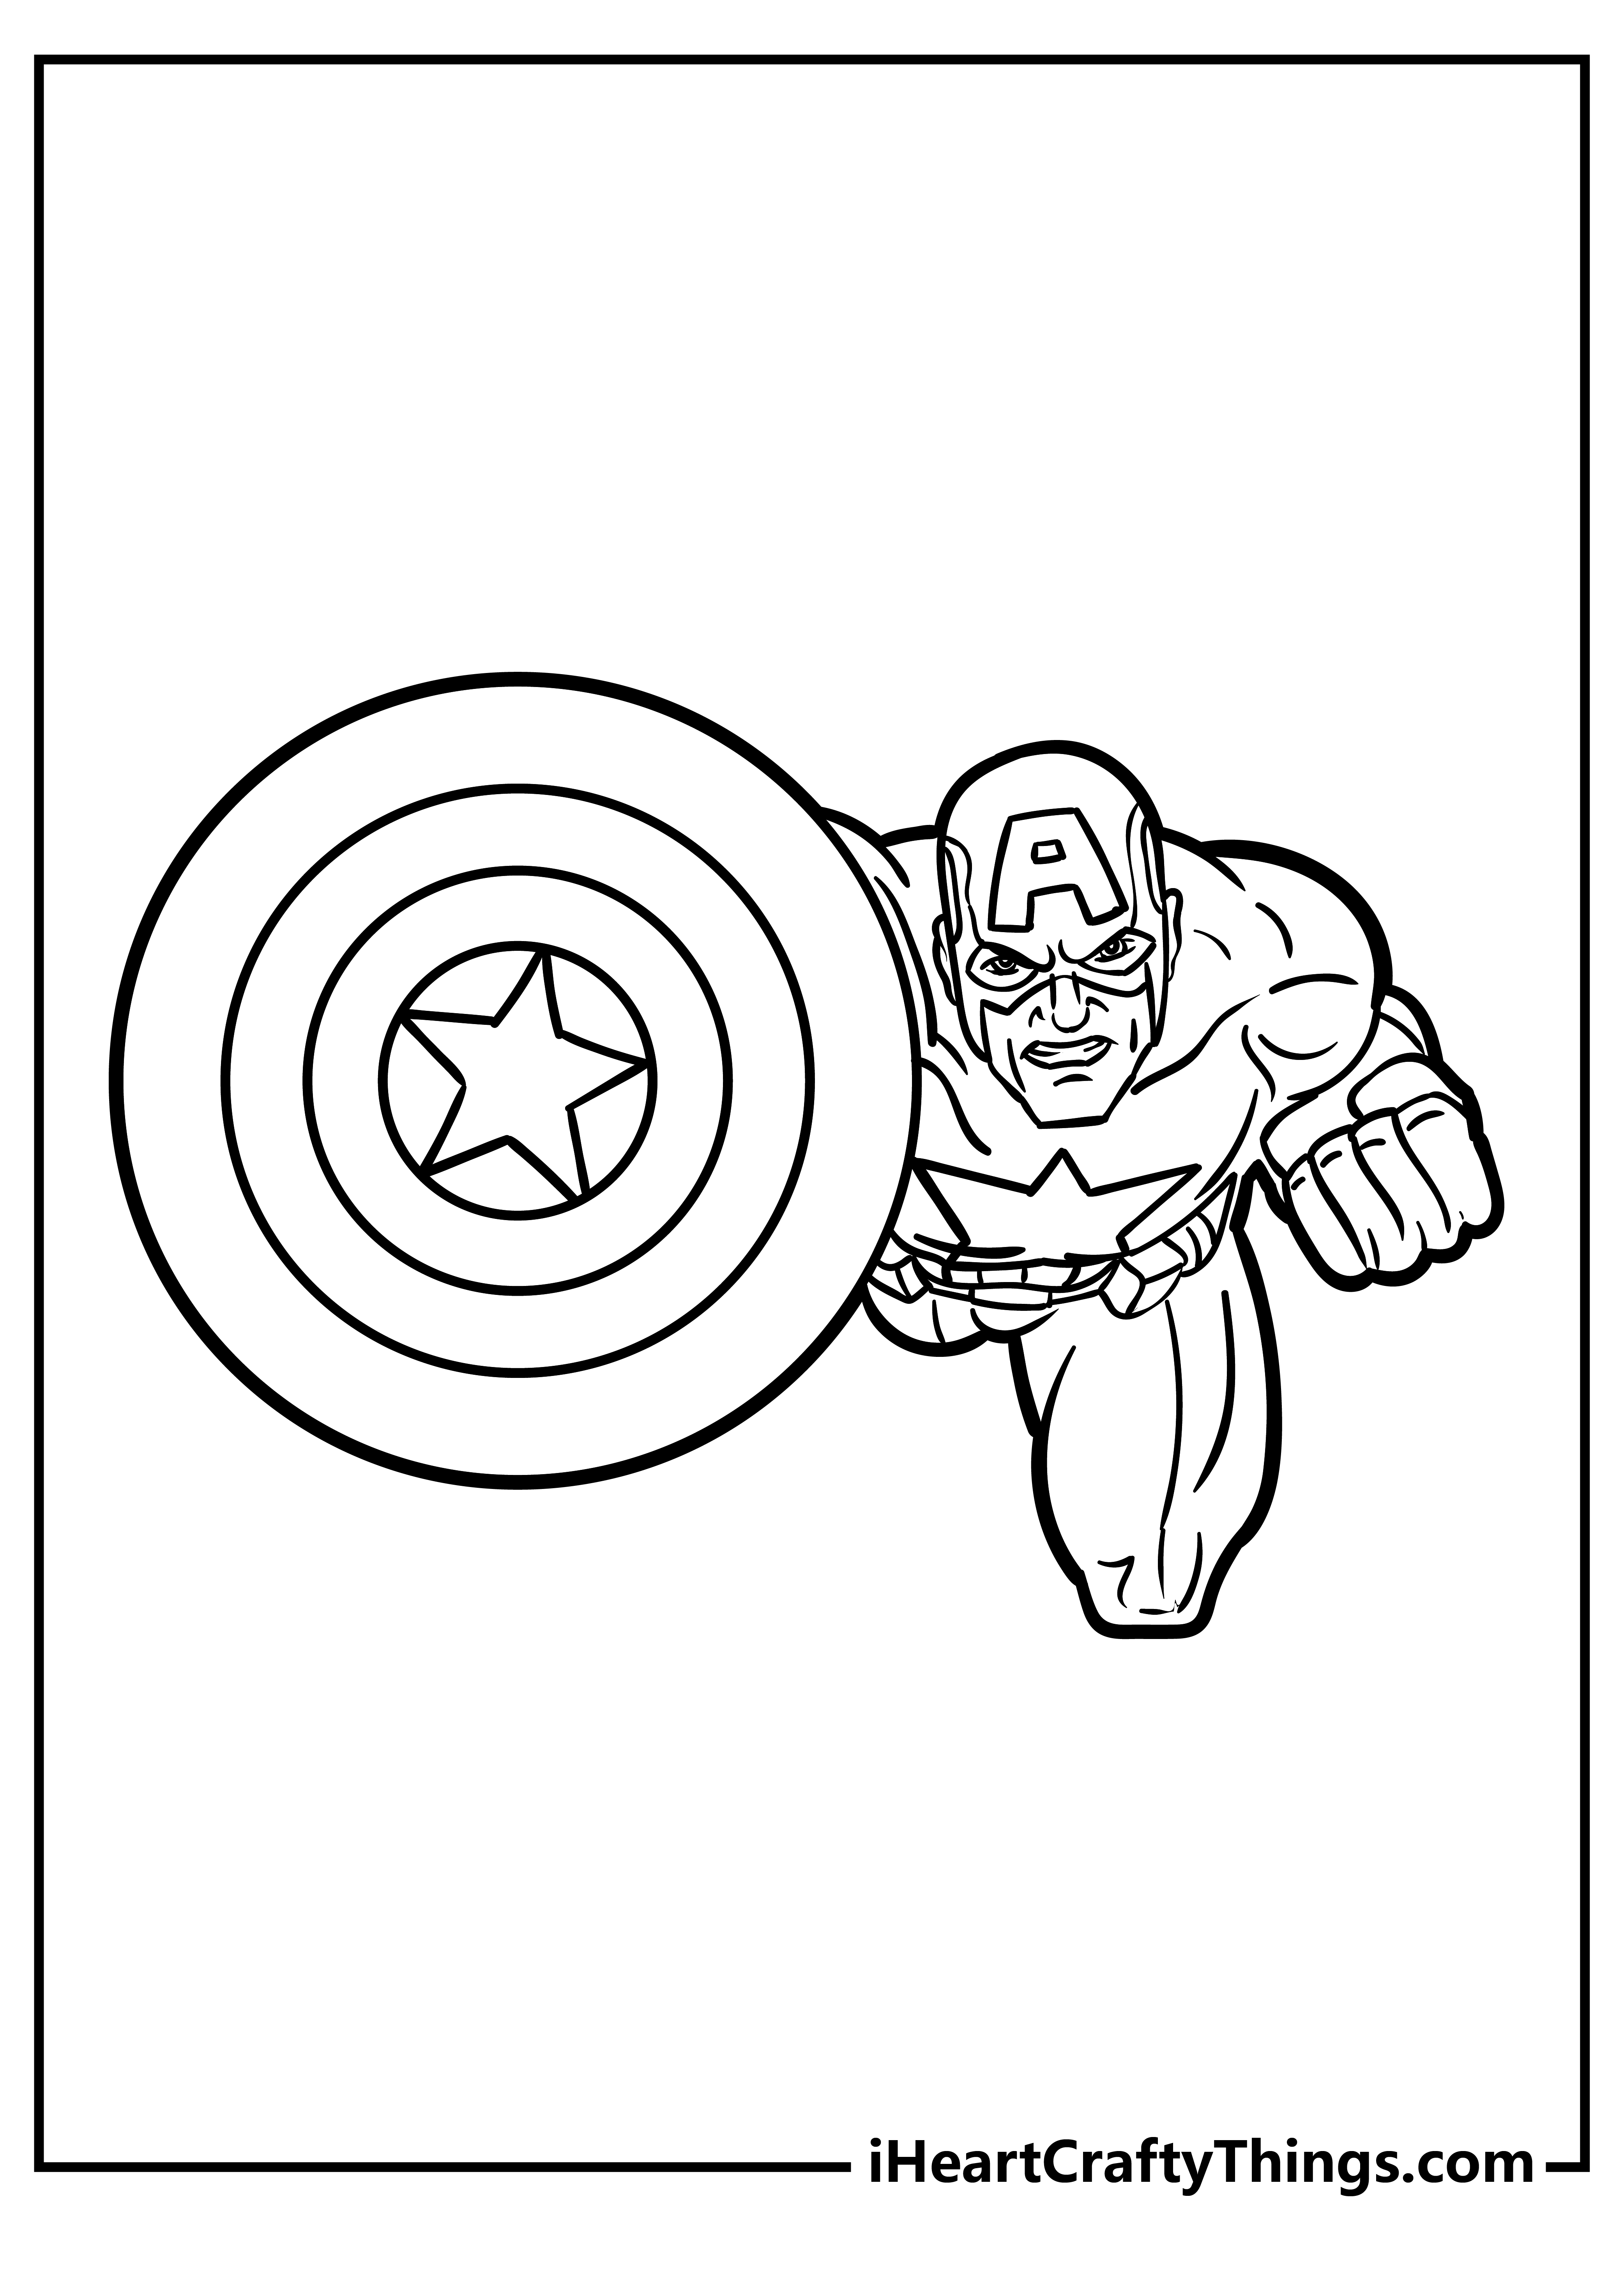 Captain america coloring pages free printables